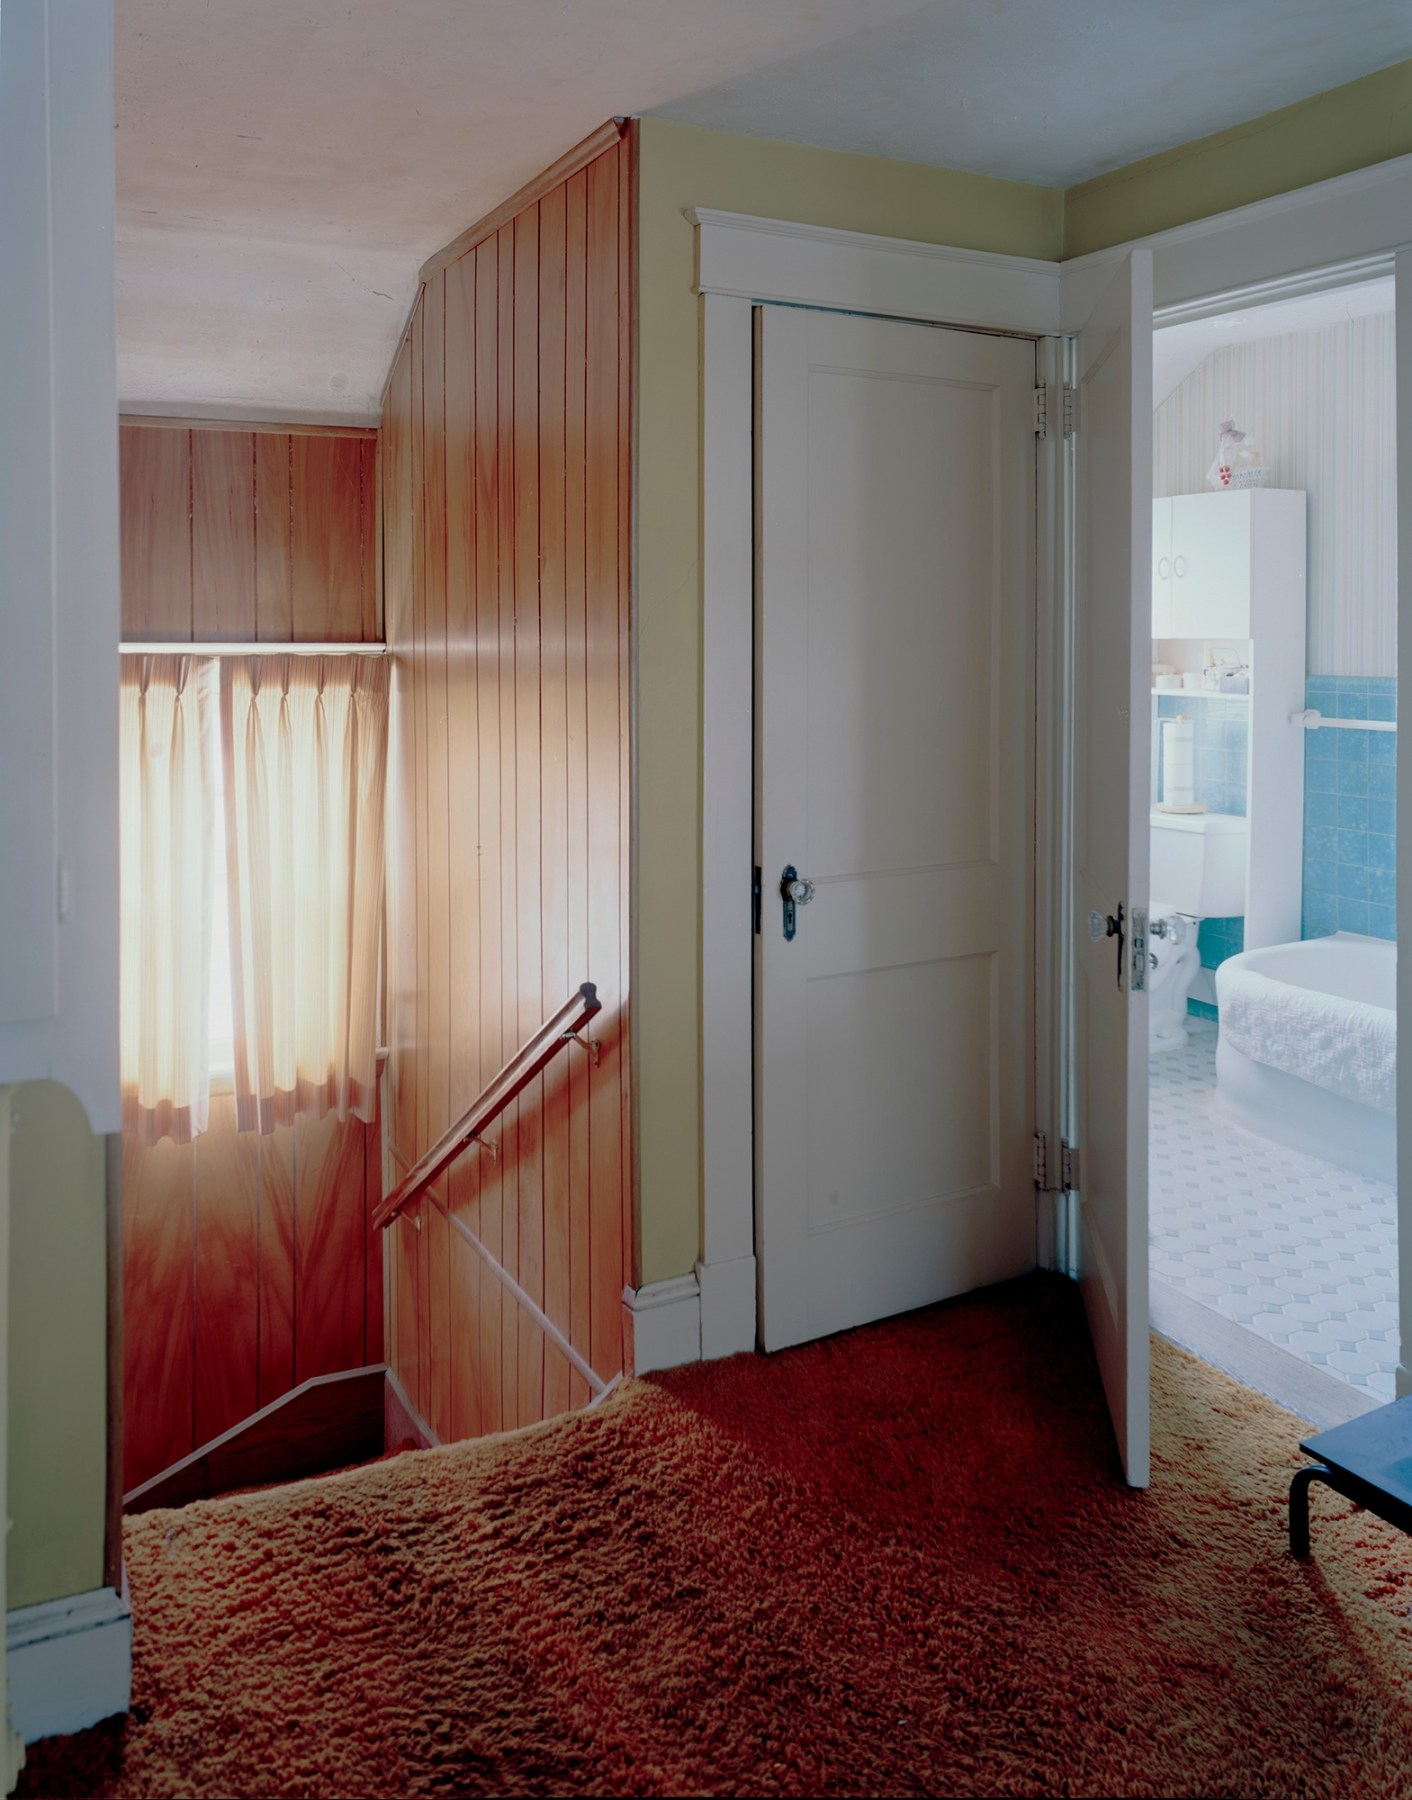 Photograph of interior at top of stairs with rust red shag carpet, by Jade Doskow